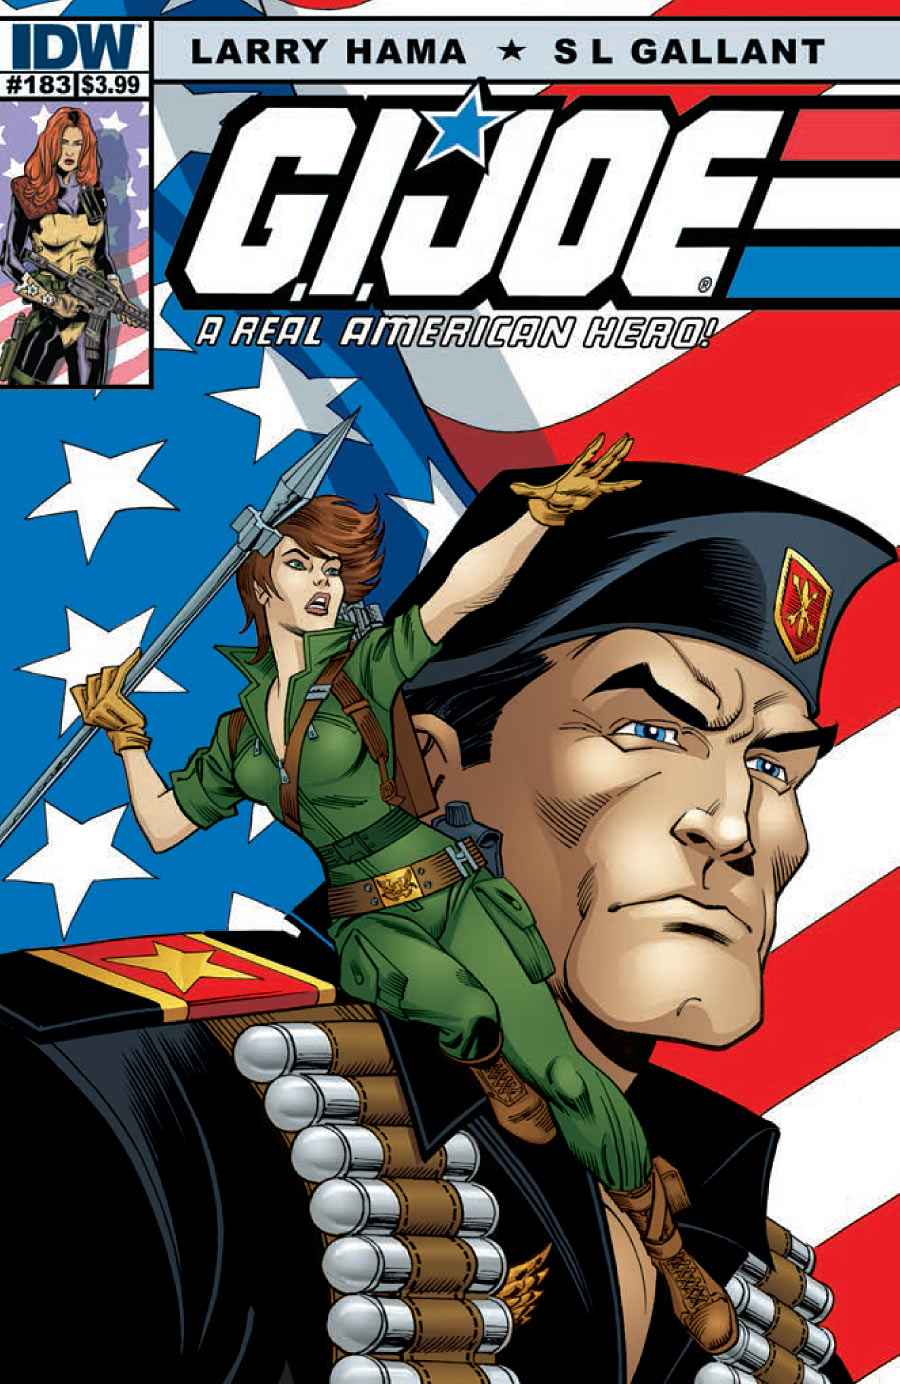 Is This Hero For Real 75 G.I. JOE: A REAL AMERICAN HERO #183